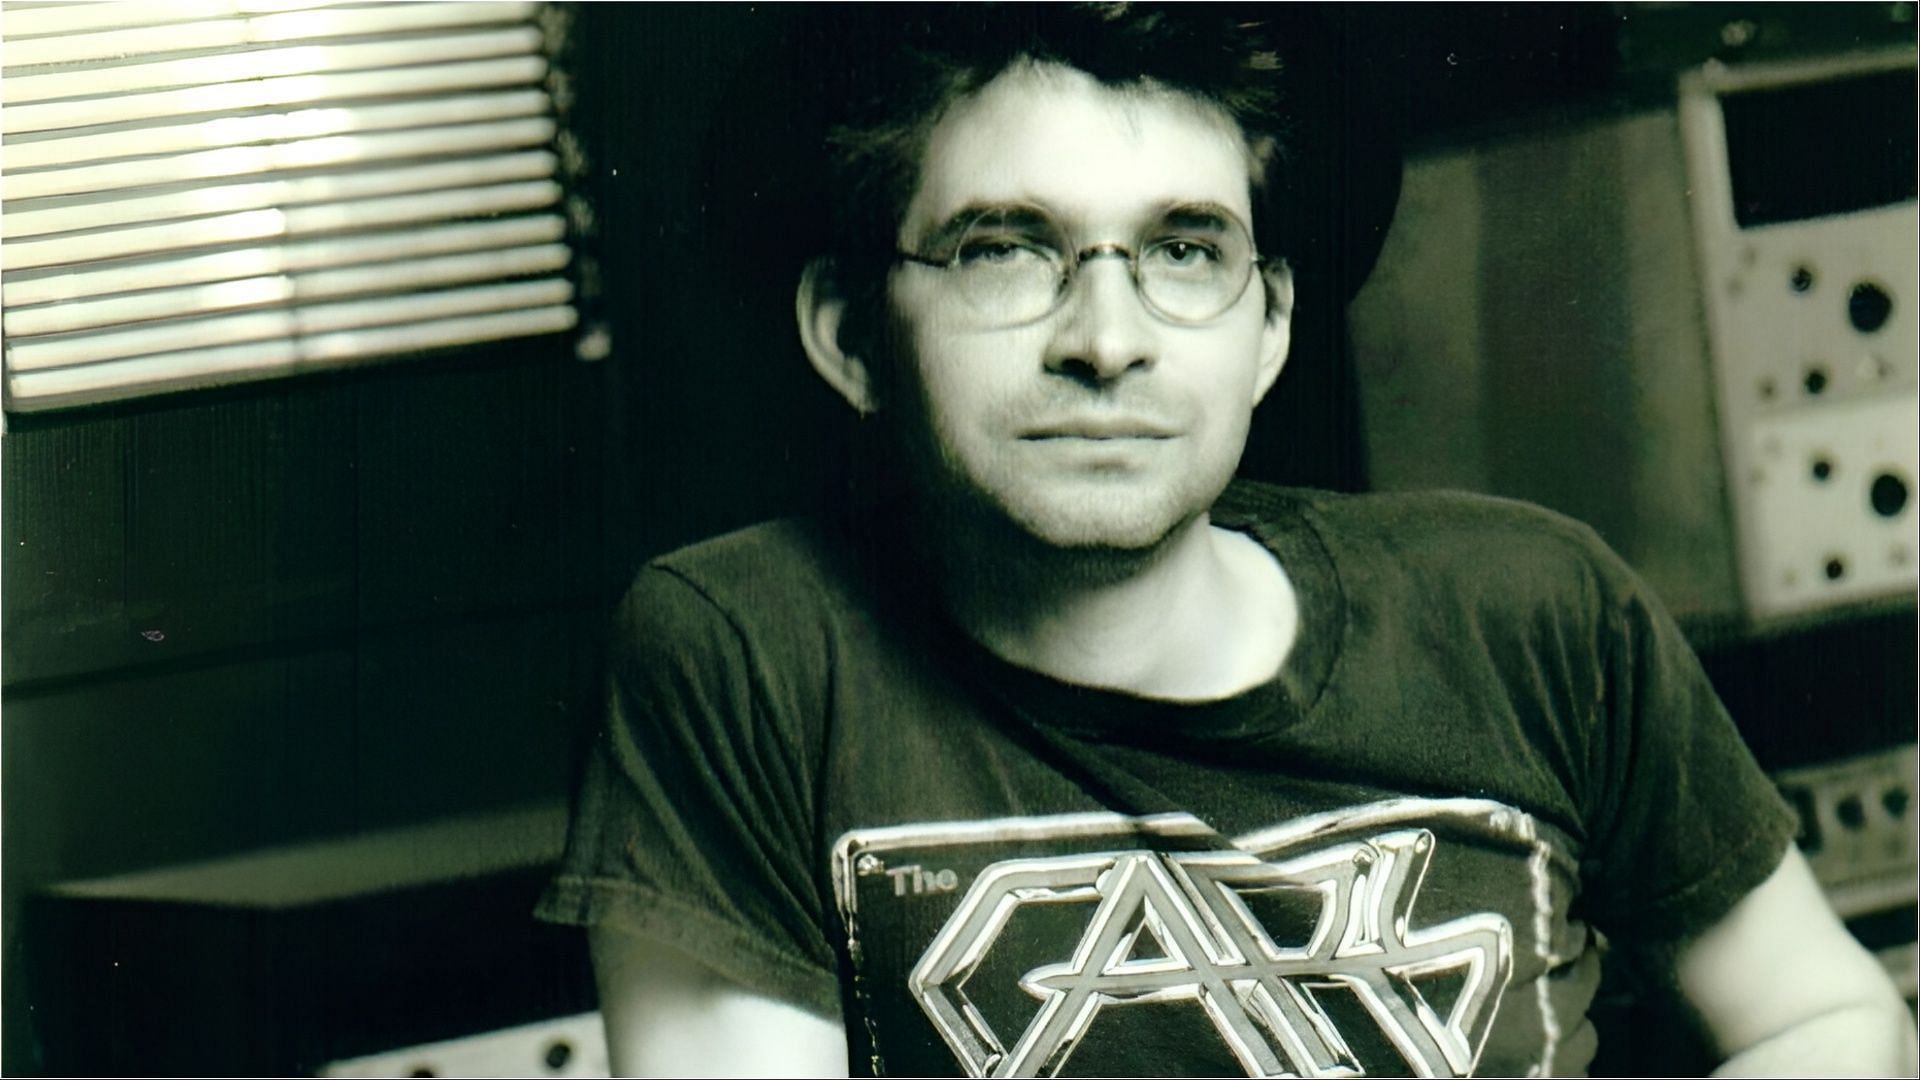 Steve Albini recently passed away at the age of 61 (Image via Electrical Audio/Facebook)